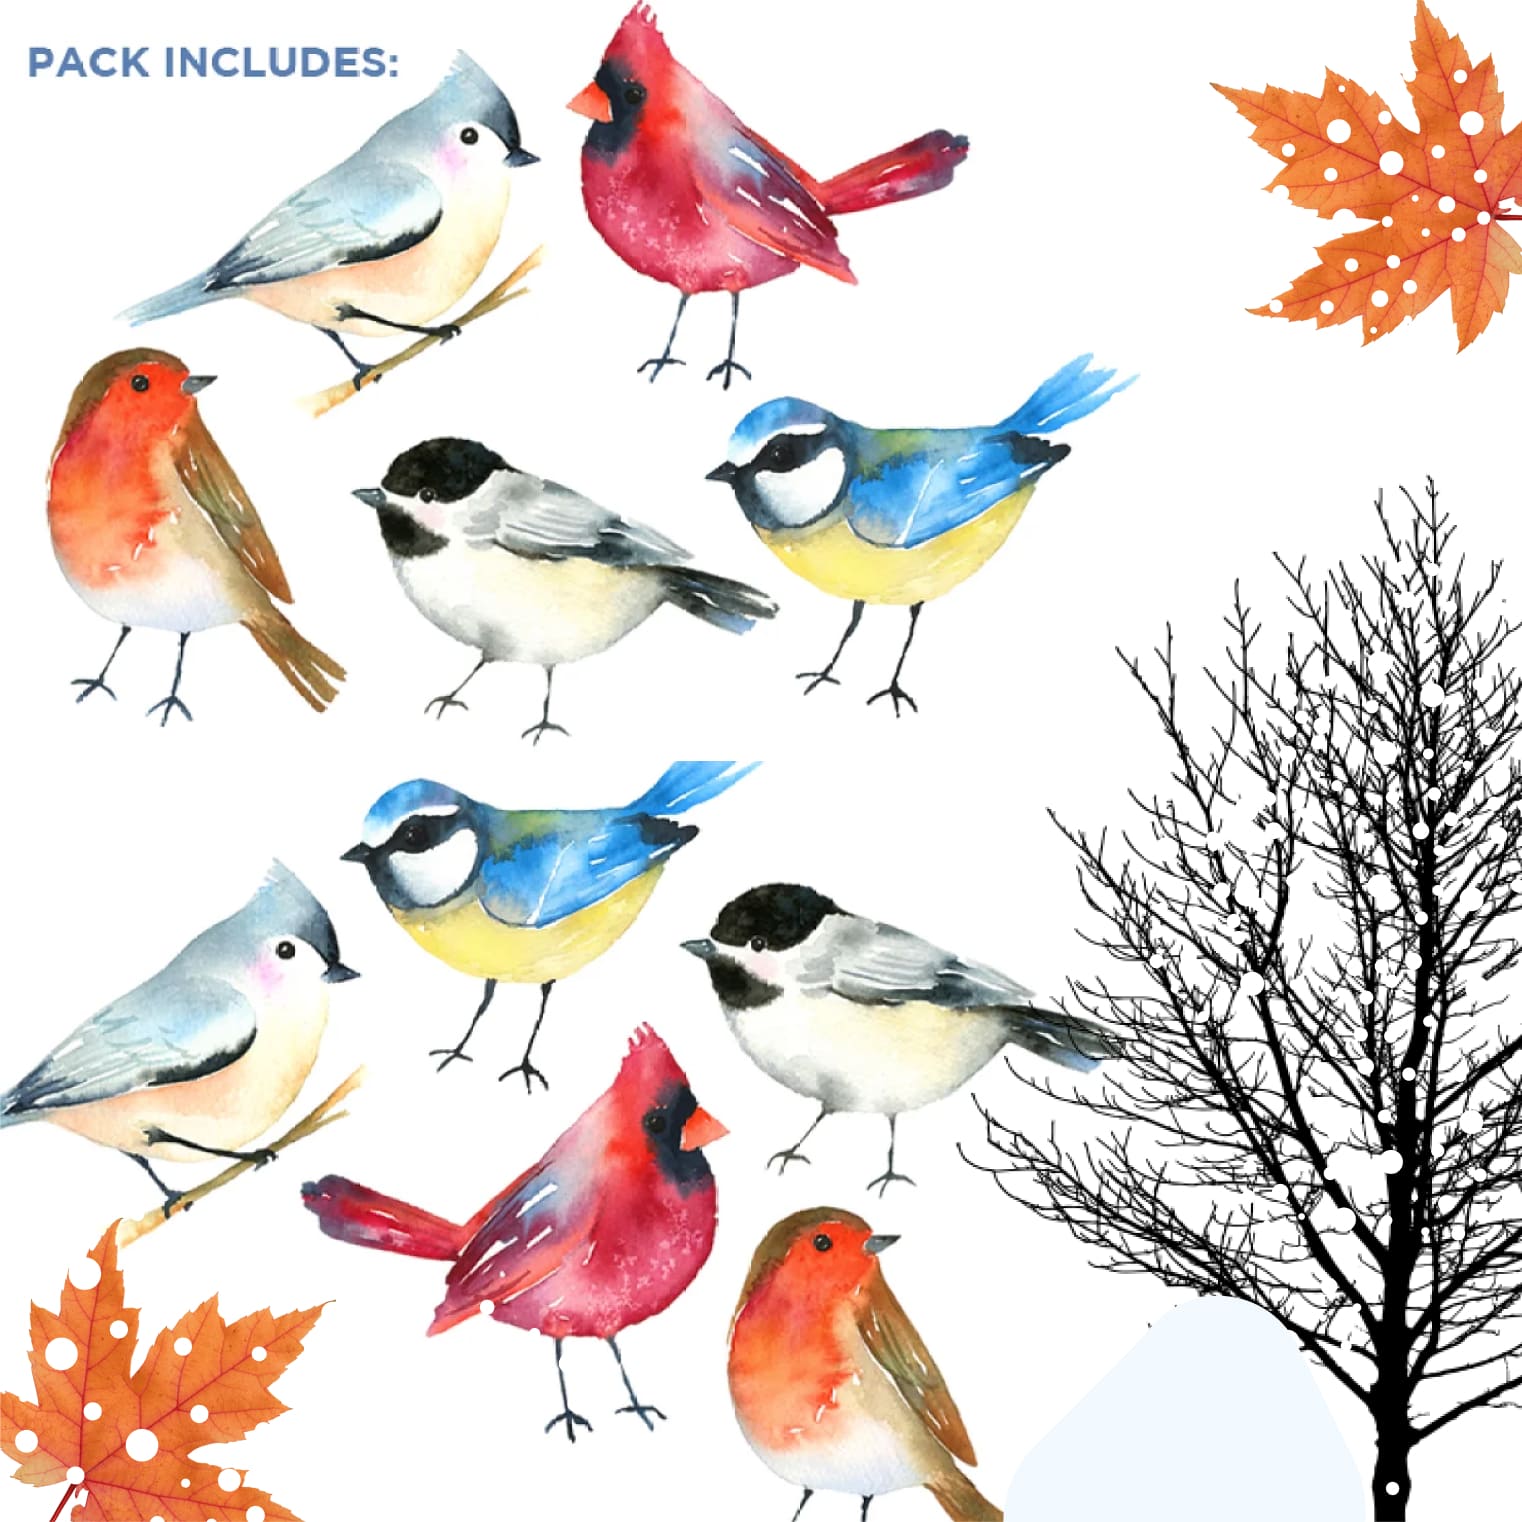 Winter Birds Watercolor Pack - 1 cover.